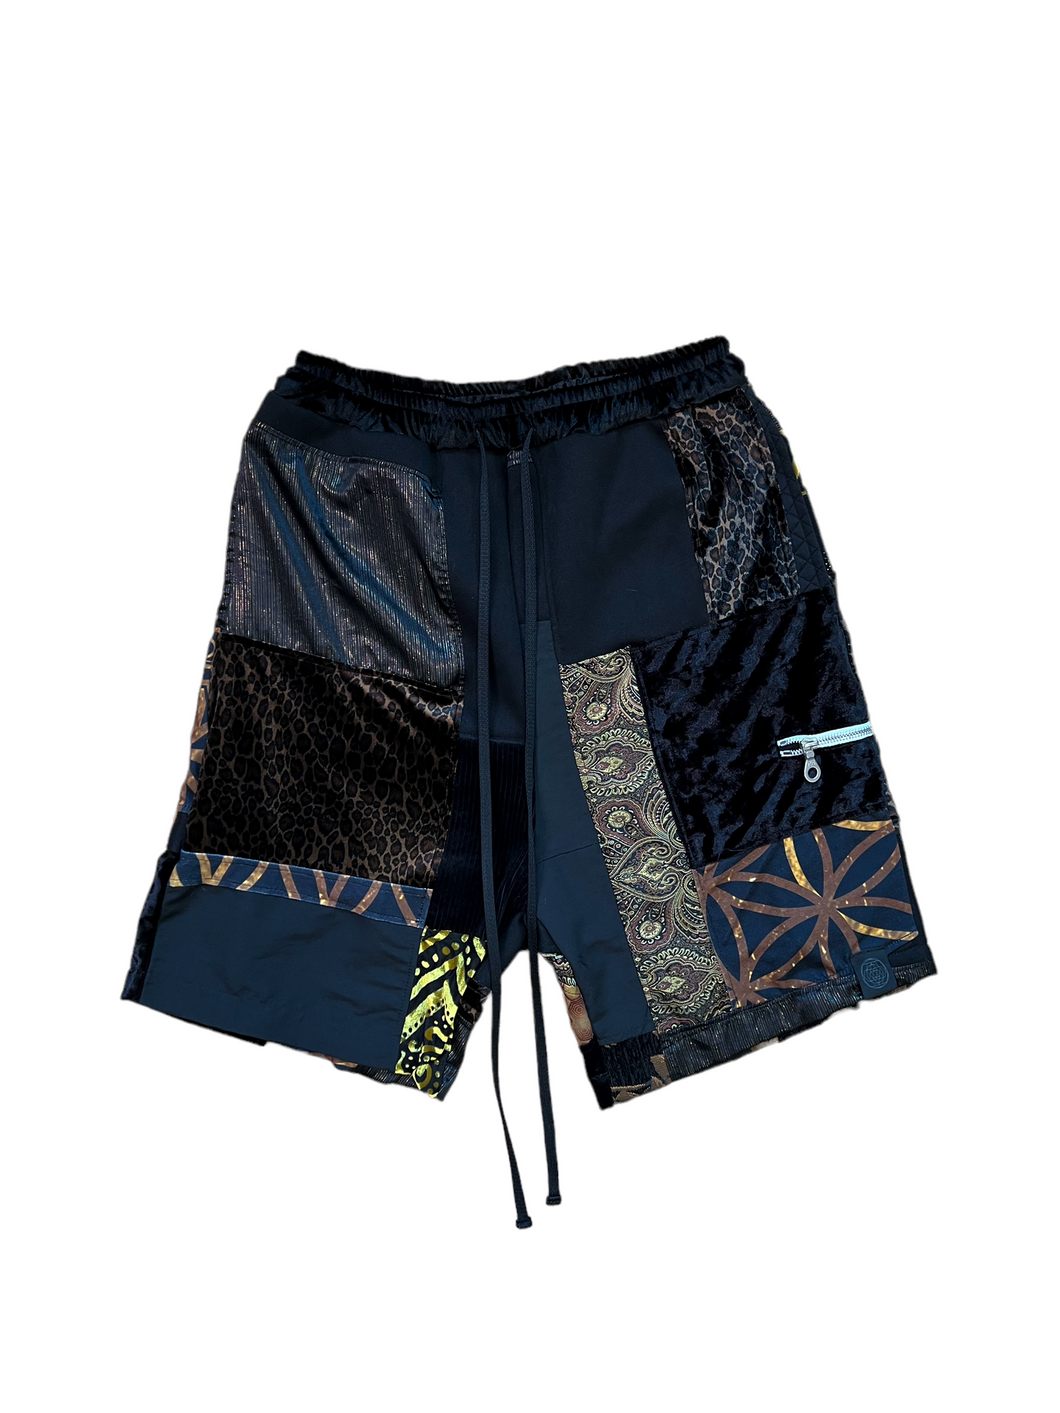 1 of 1 GLDN LPRD PATCHWORK SHORTS - S/M